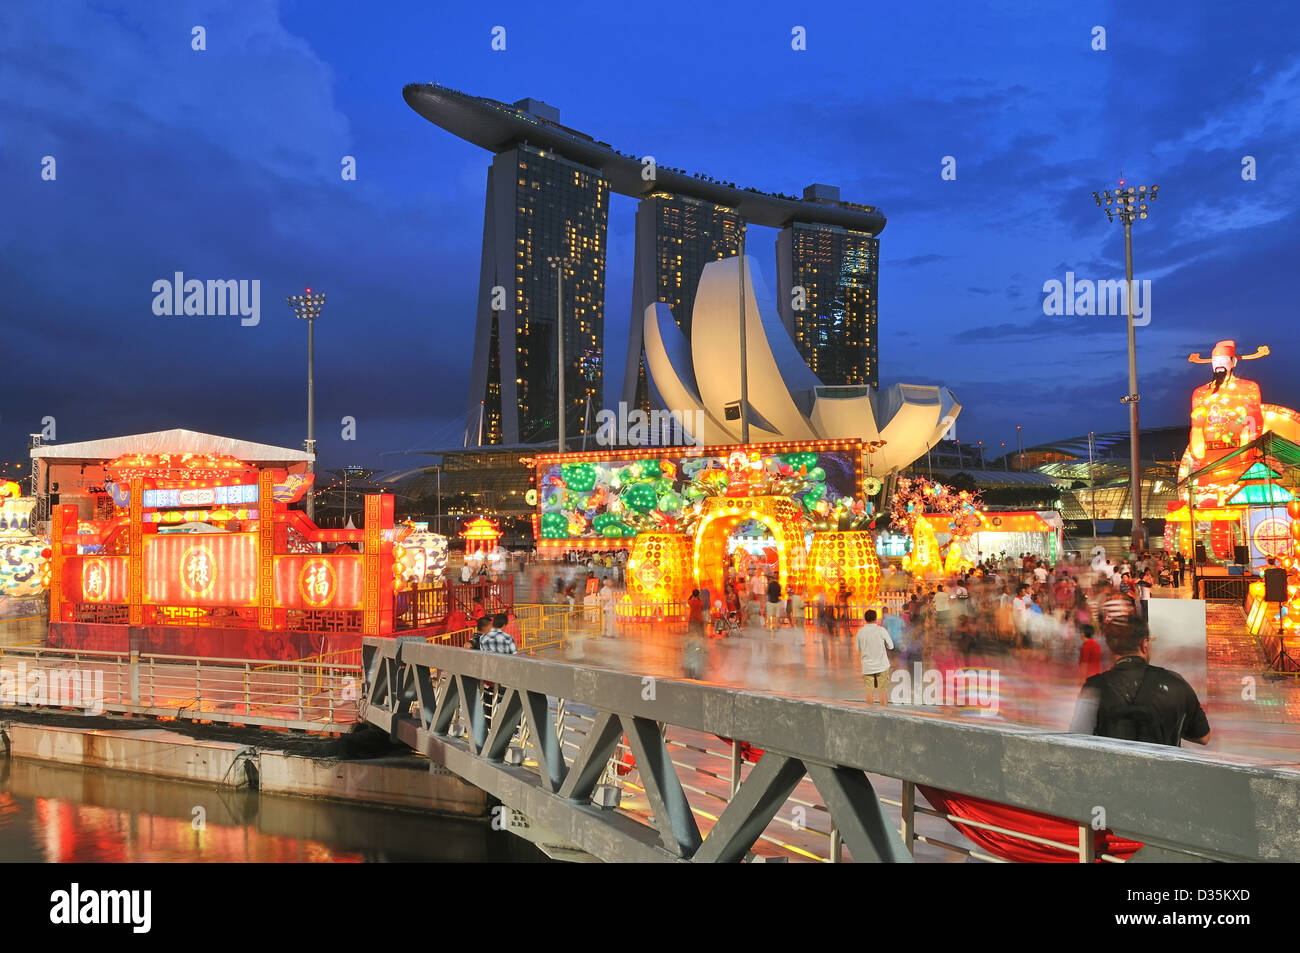 One of the highlights of the Chinese New Year celebration in Singapore is the River Hongbao. Stock Photo